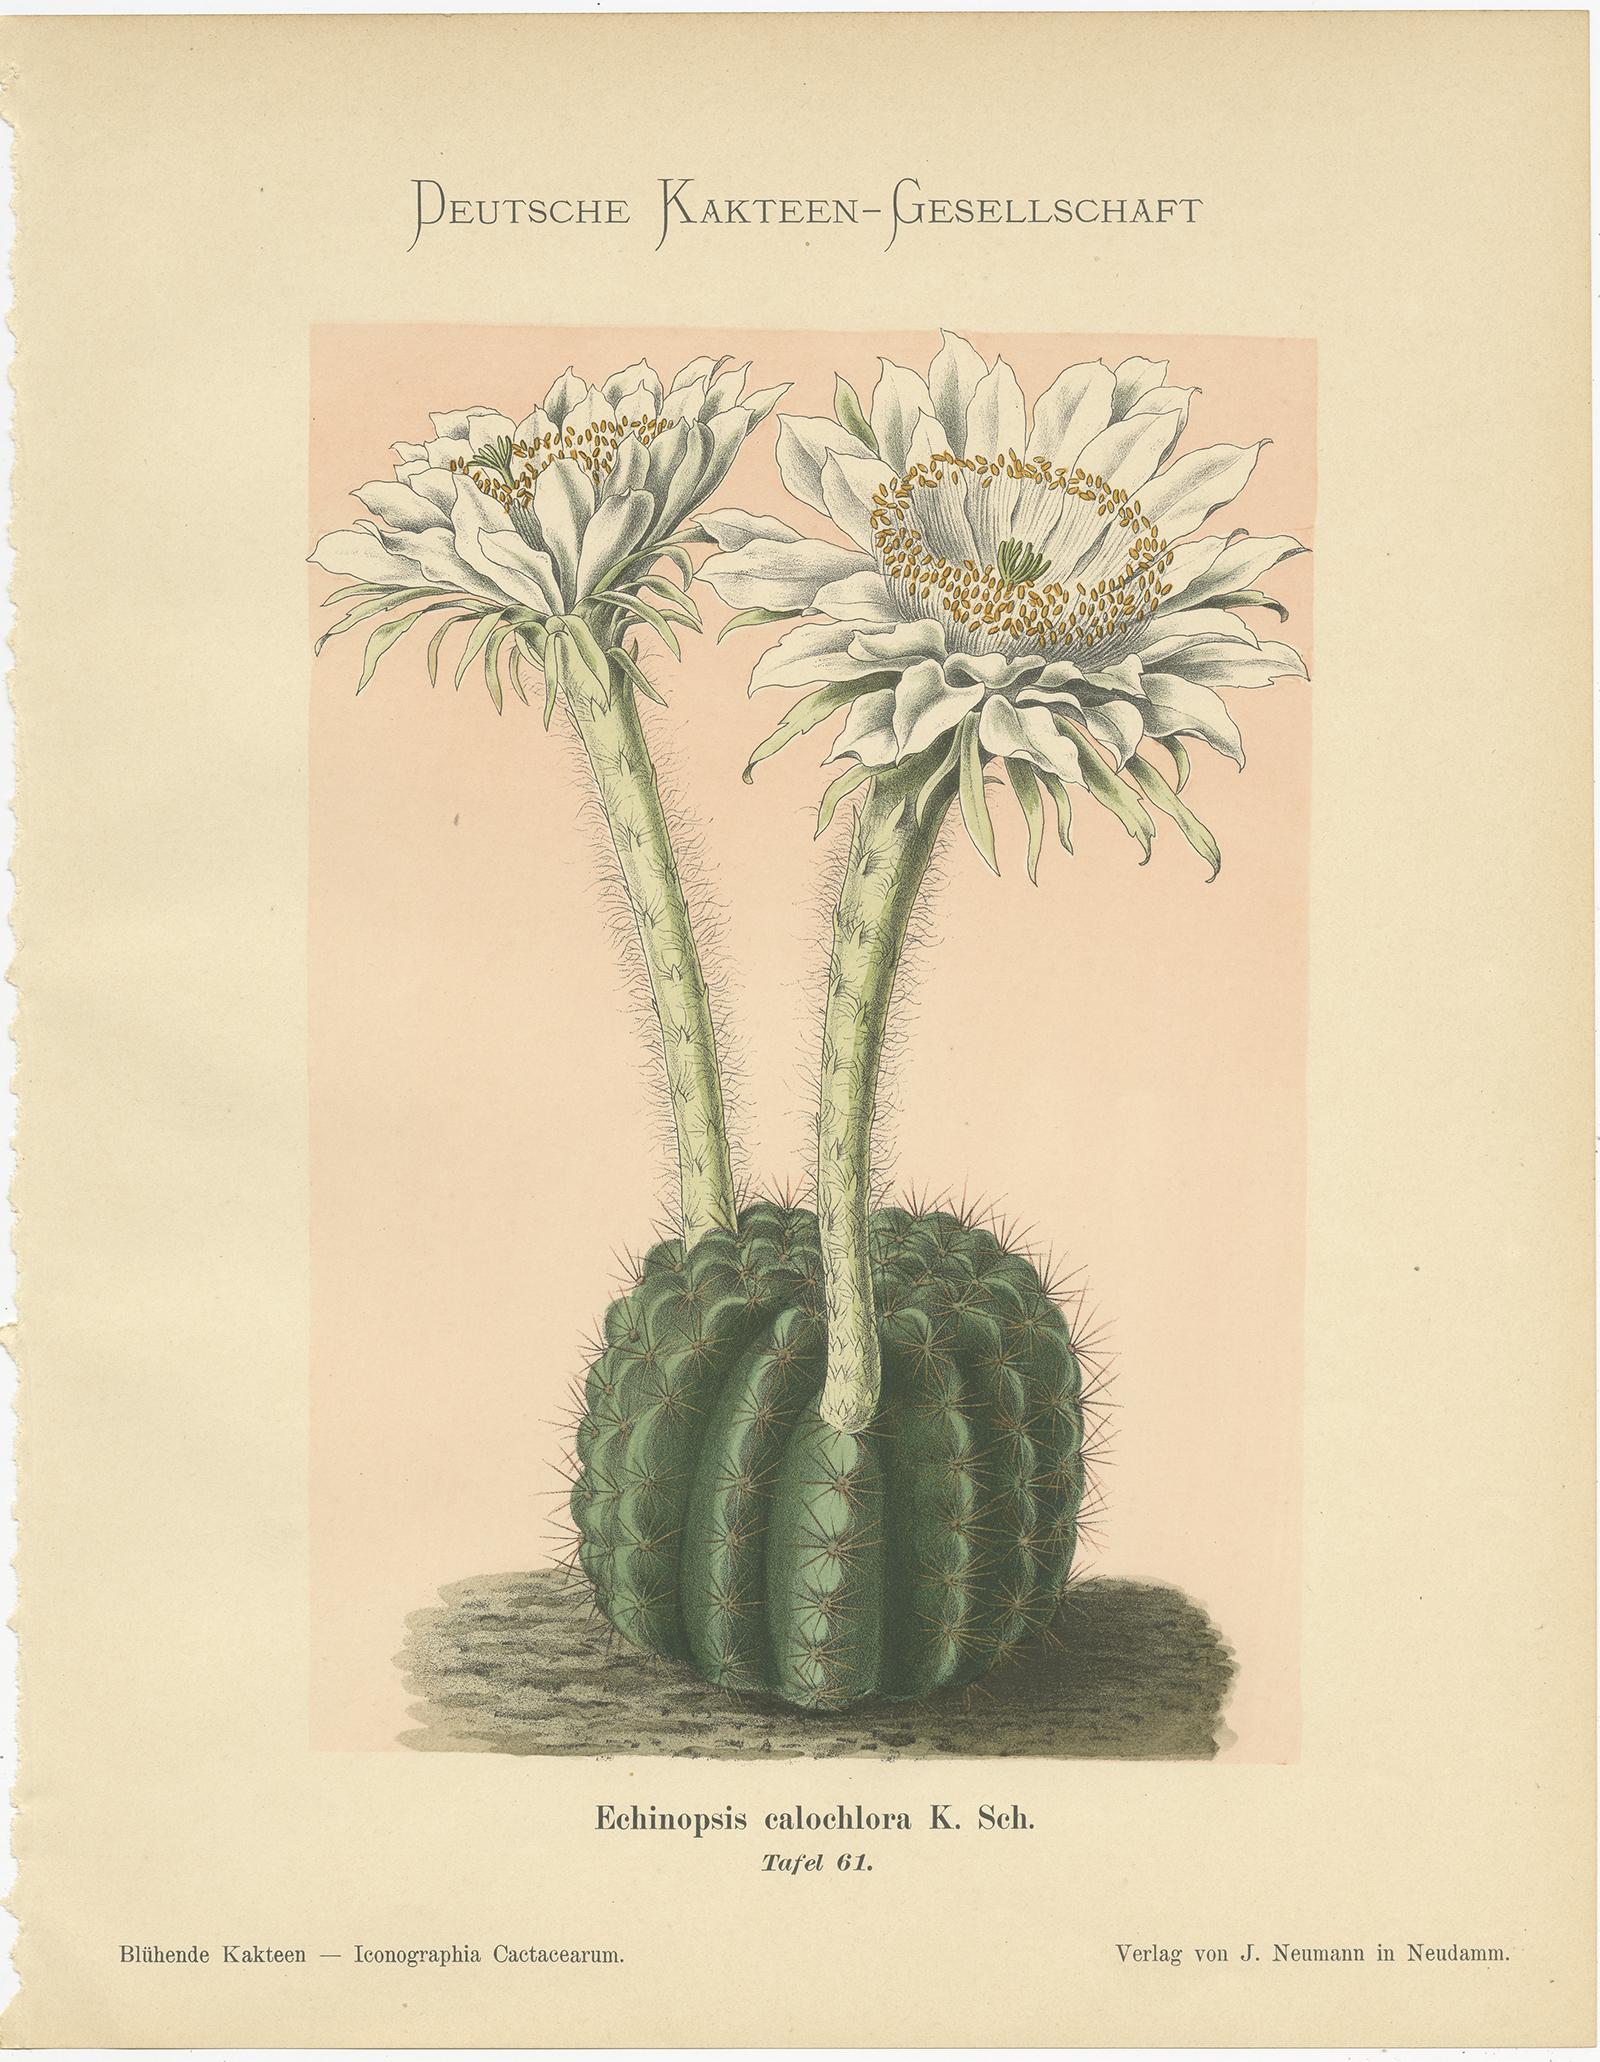 Set of four antique cactus prints depicting the Echinopsis Calochlora, Phyllocactus Hibridus Wrayi Hort, Echinocactus Froehlichianus and the Mamillaria Wildii Dietr. These prints originate from 'Blühende Kakteen' by K. Schumann and M. Gürke.